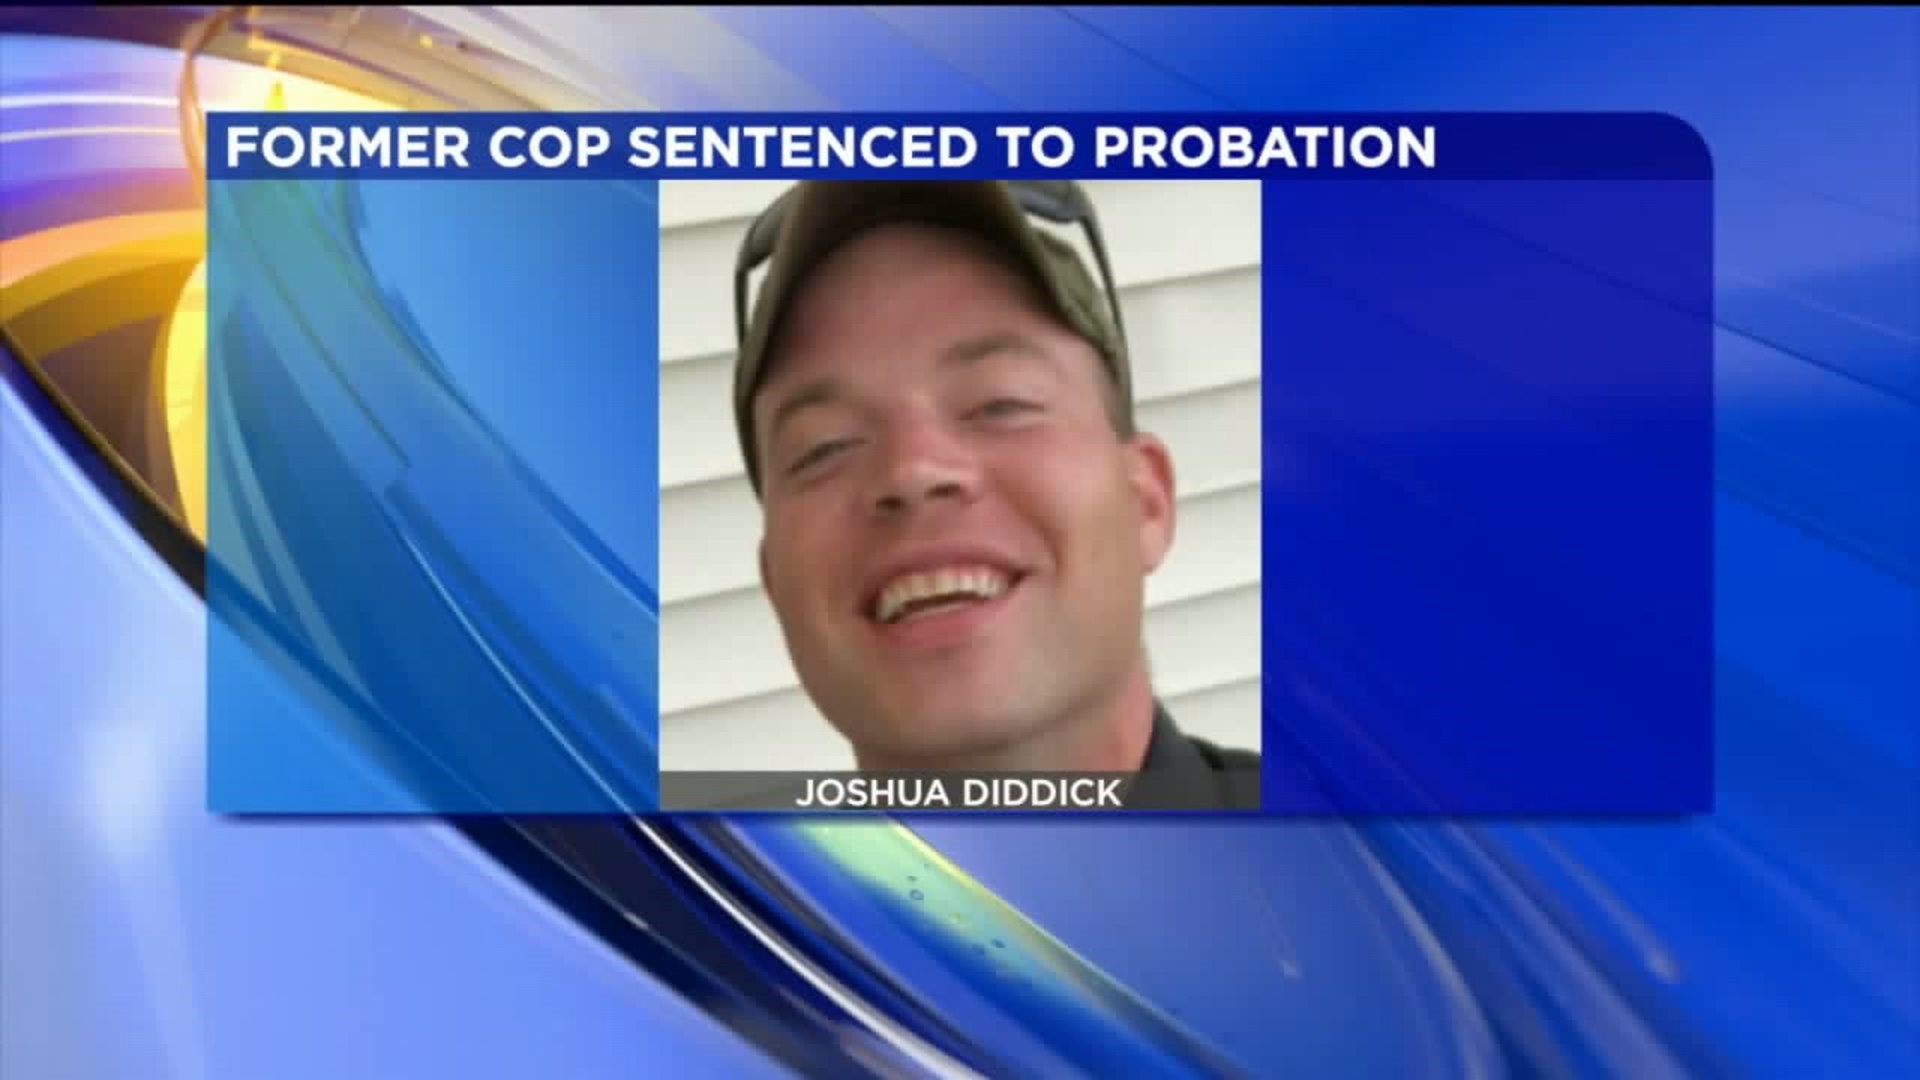 Former Cop Sentenced to Probation for Corruption of Minors